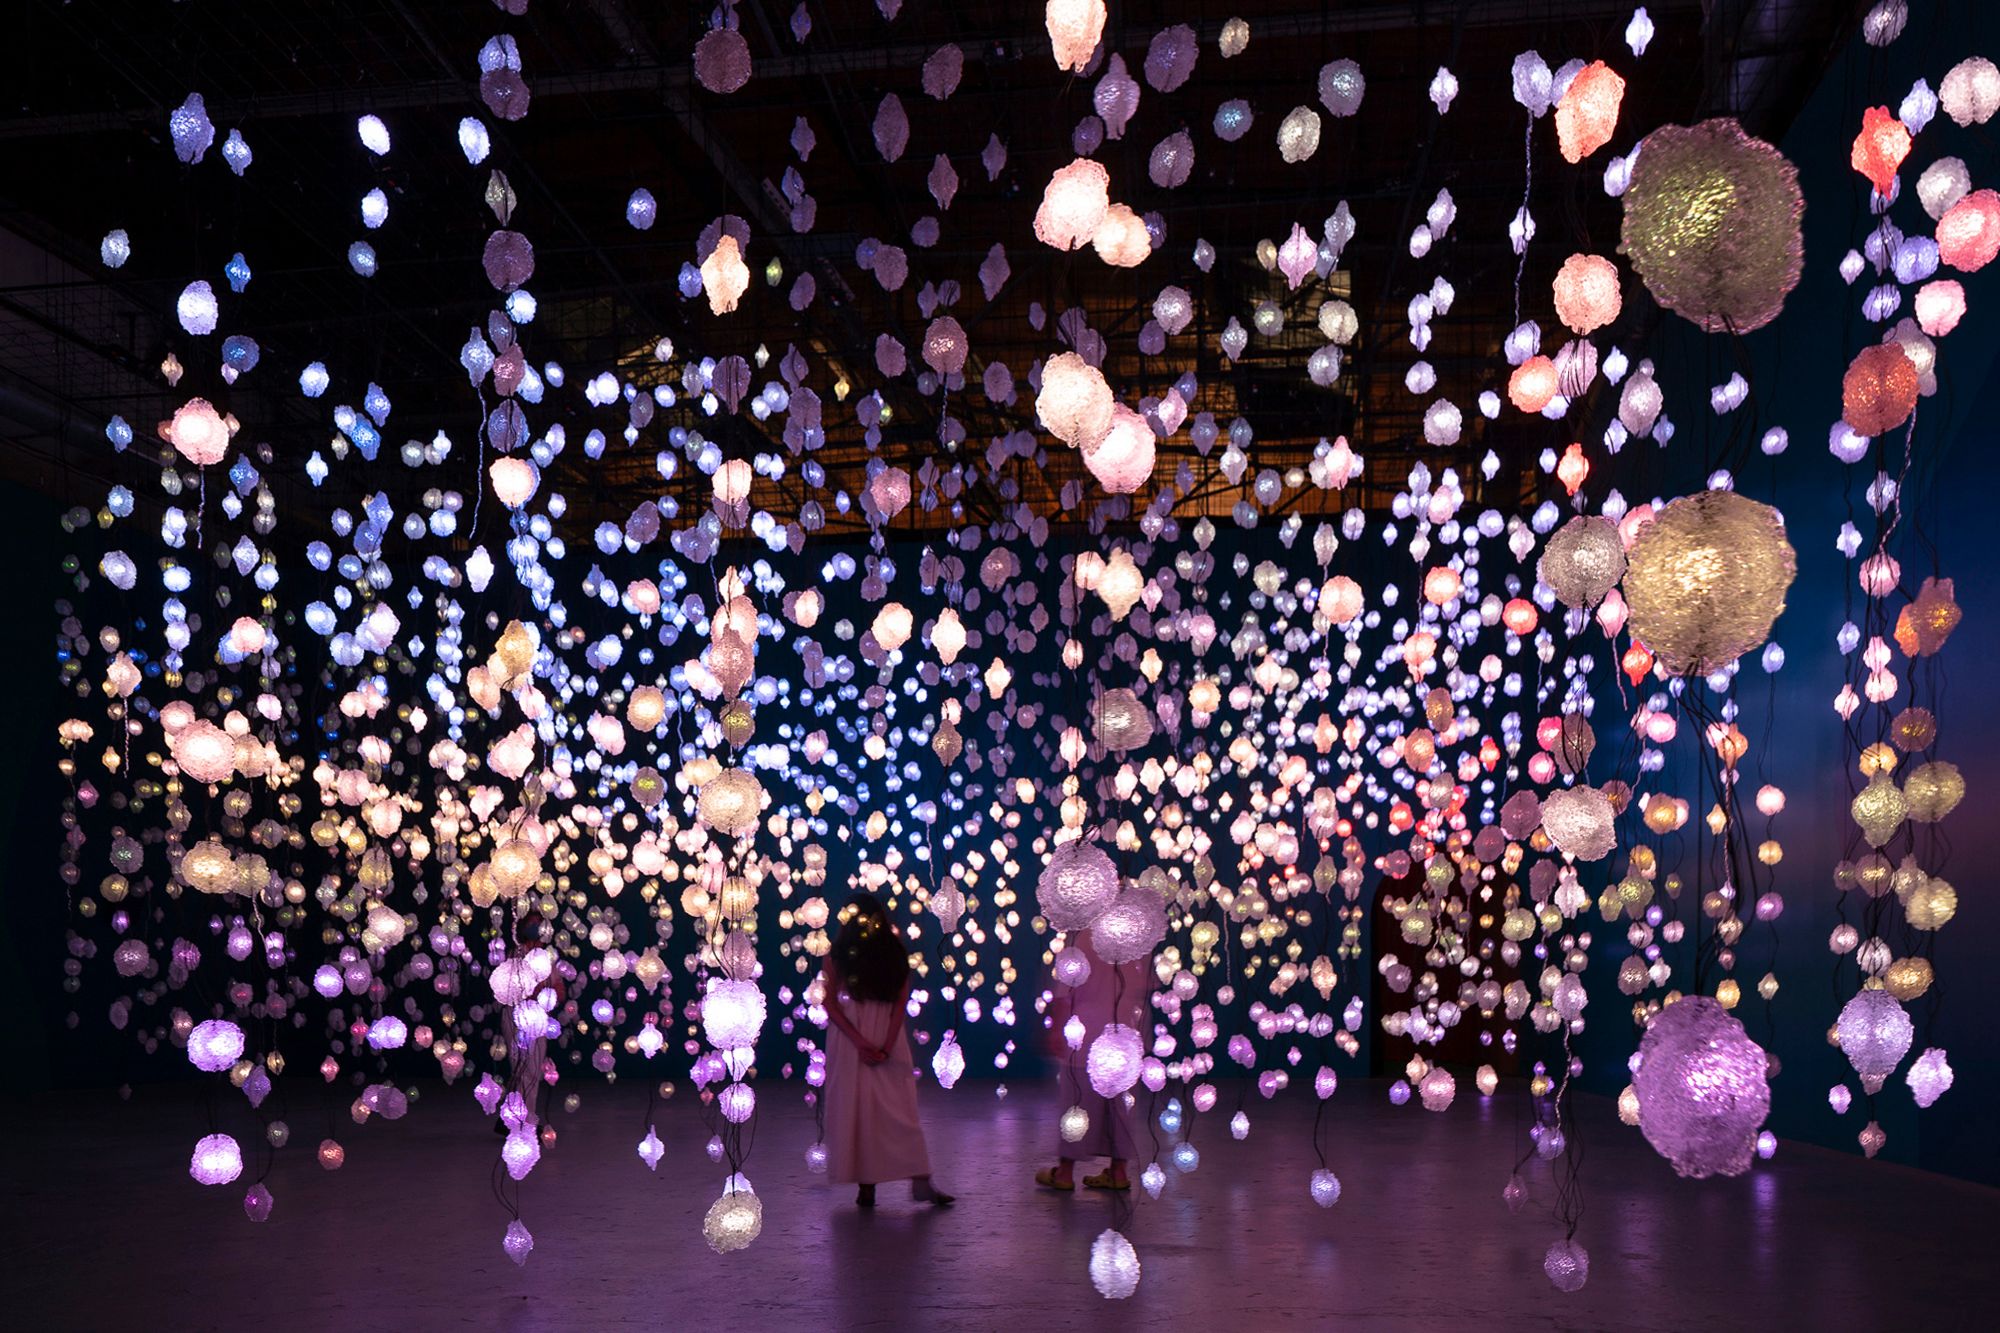 A dark gallery space filled with lights hung on vertical cables, as part of the Pipilotti Rist exhibition in Qatar.